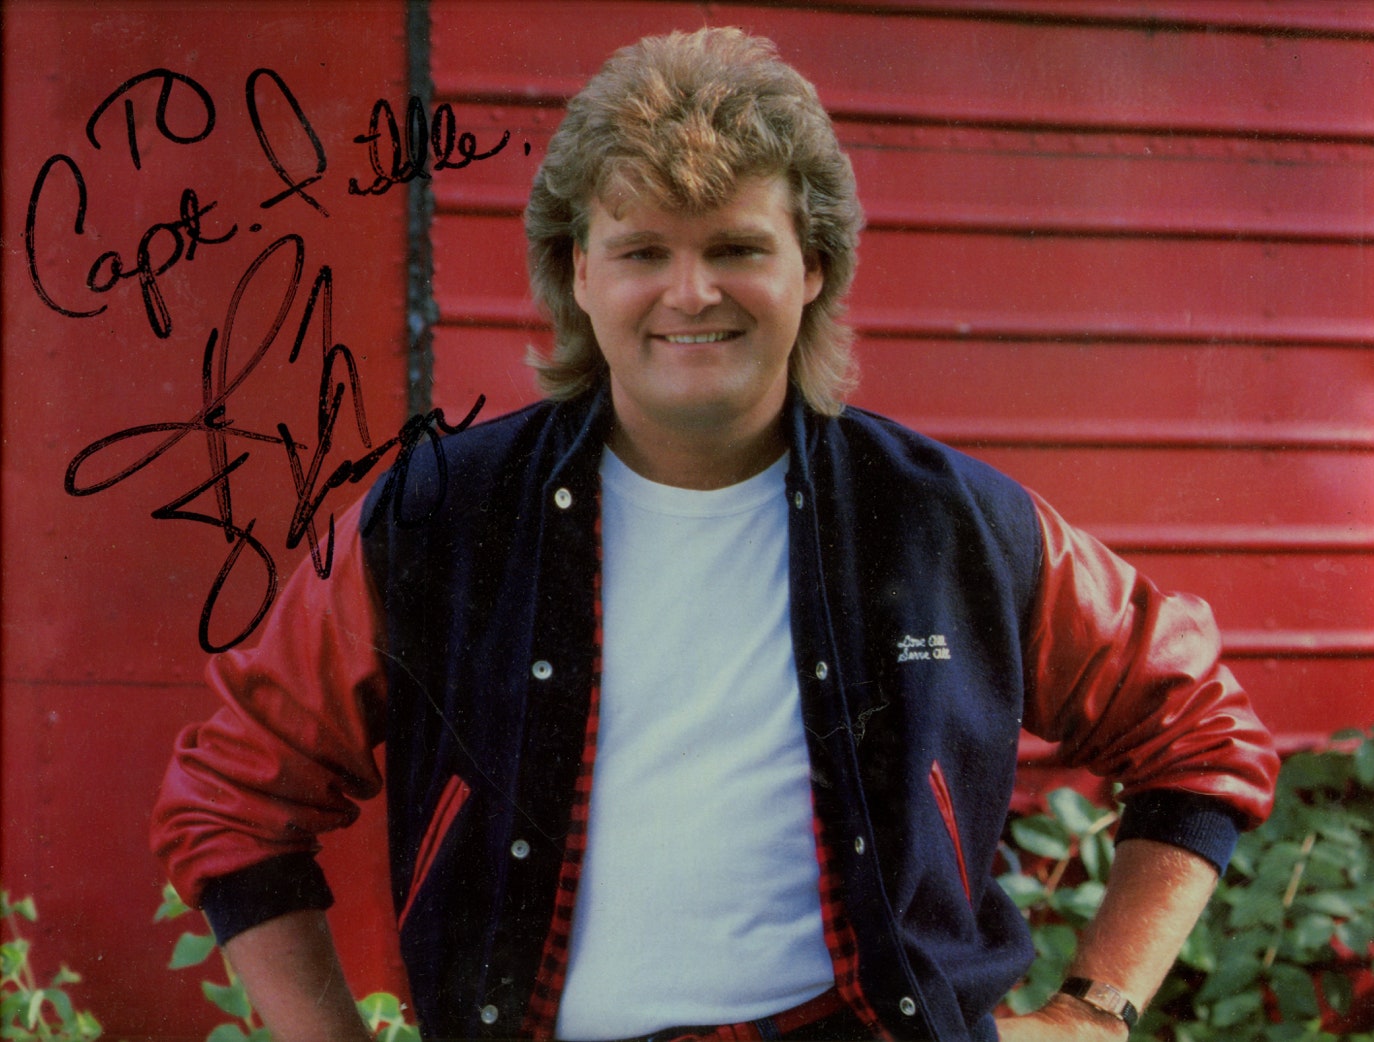 Ricky Skaggs autographs his photo to Captain Fiddle(Ryan Thomson" who opened for him in the Augusta Civic Center, Maine, April 20, 1988